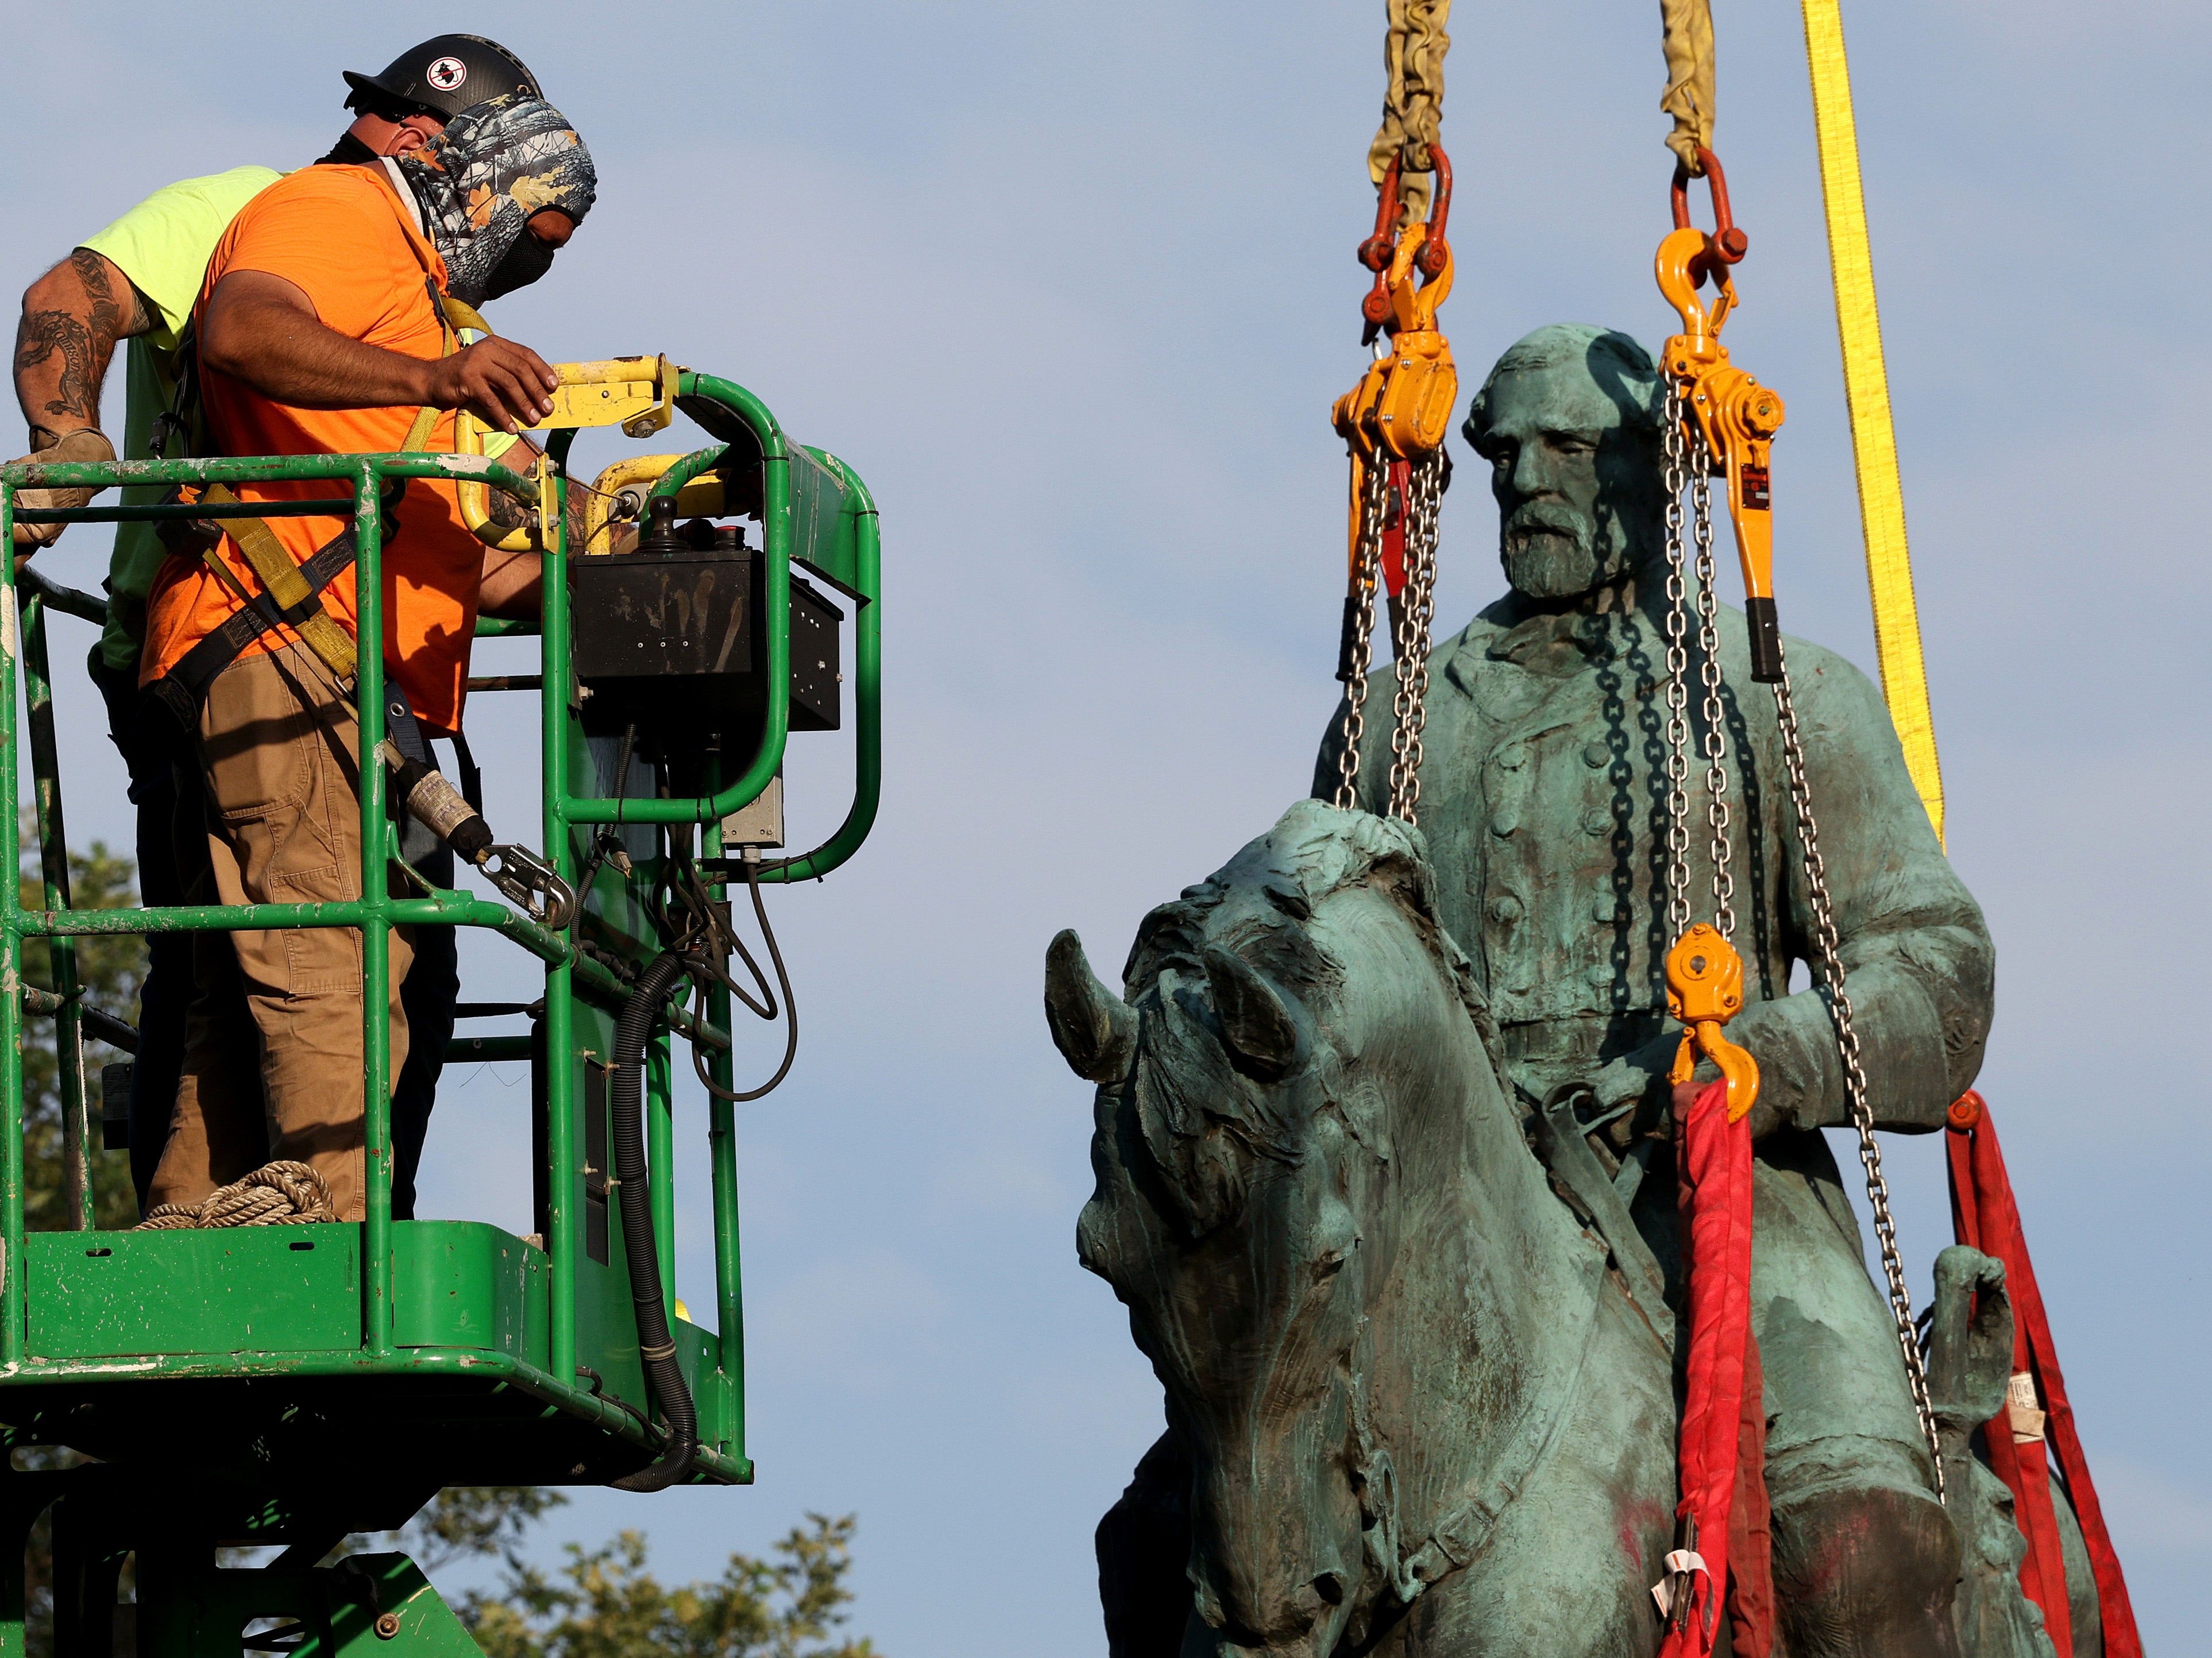 Workers remove a statue of Confederate General Robert E. Lee from Market Street Park July 10, 2021 in Charlottesville, Virginia.